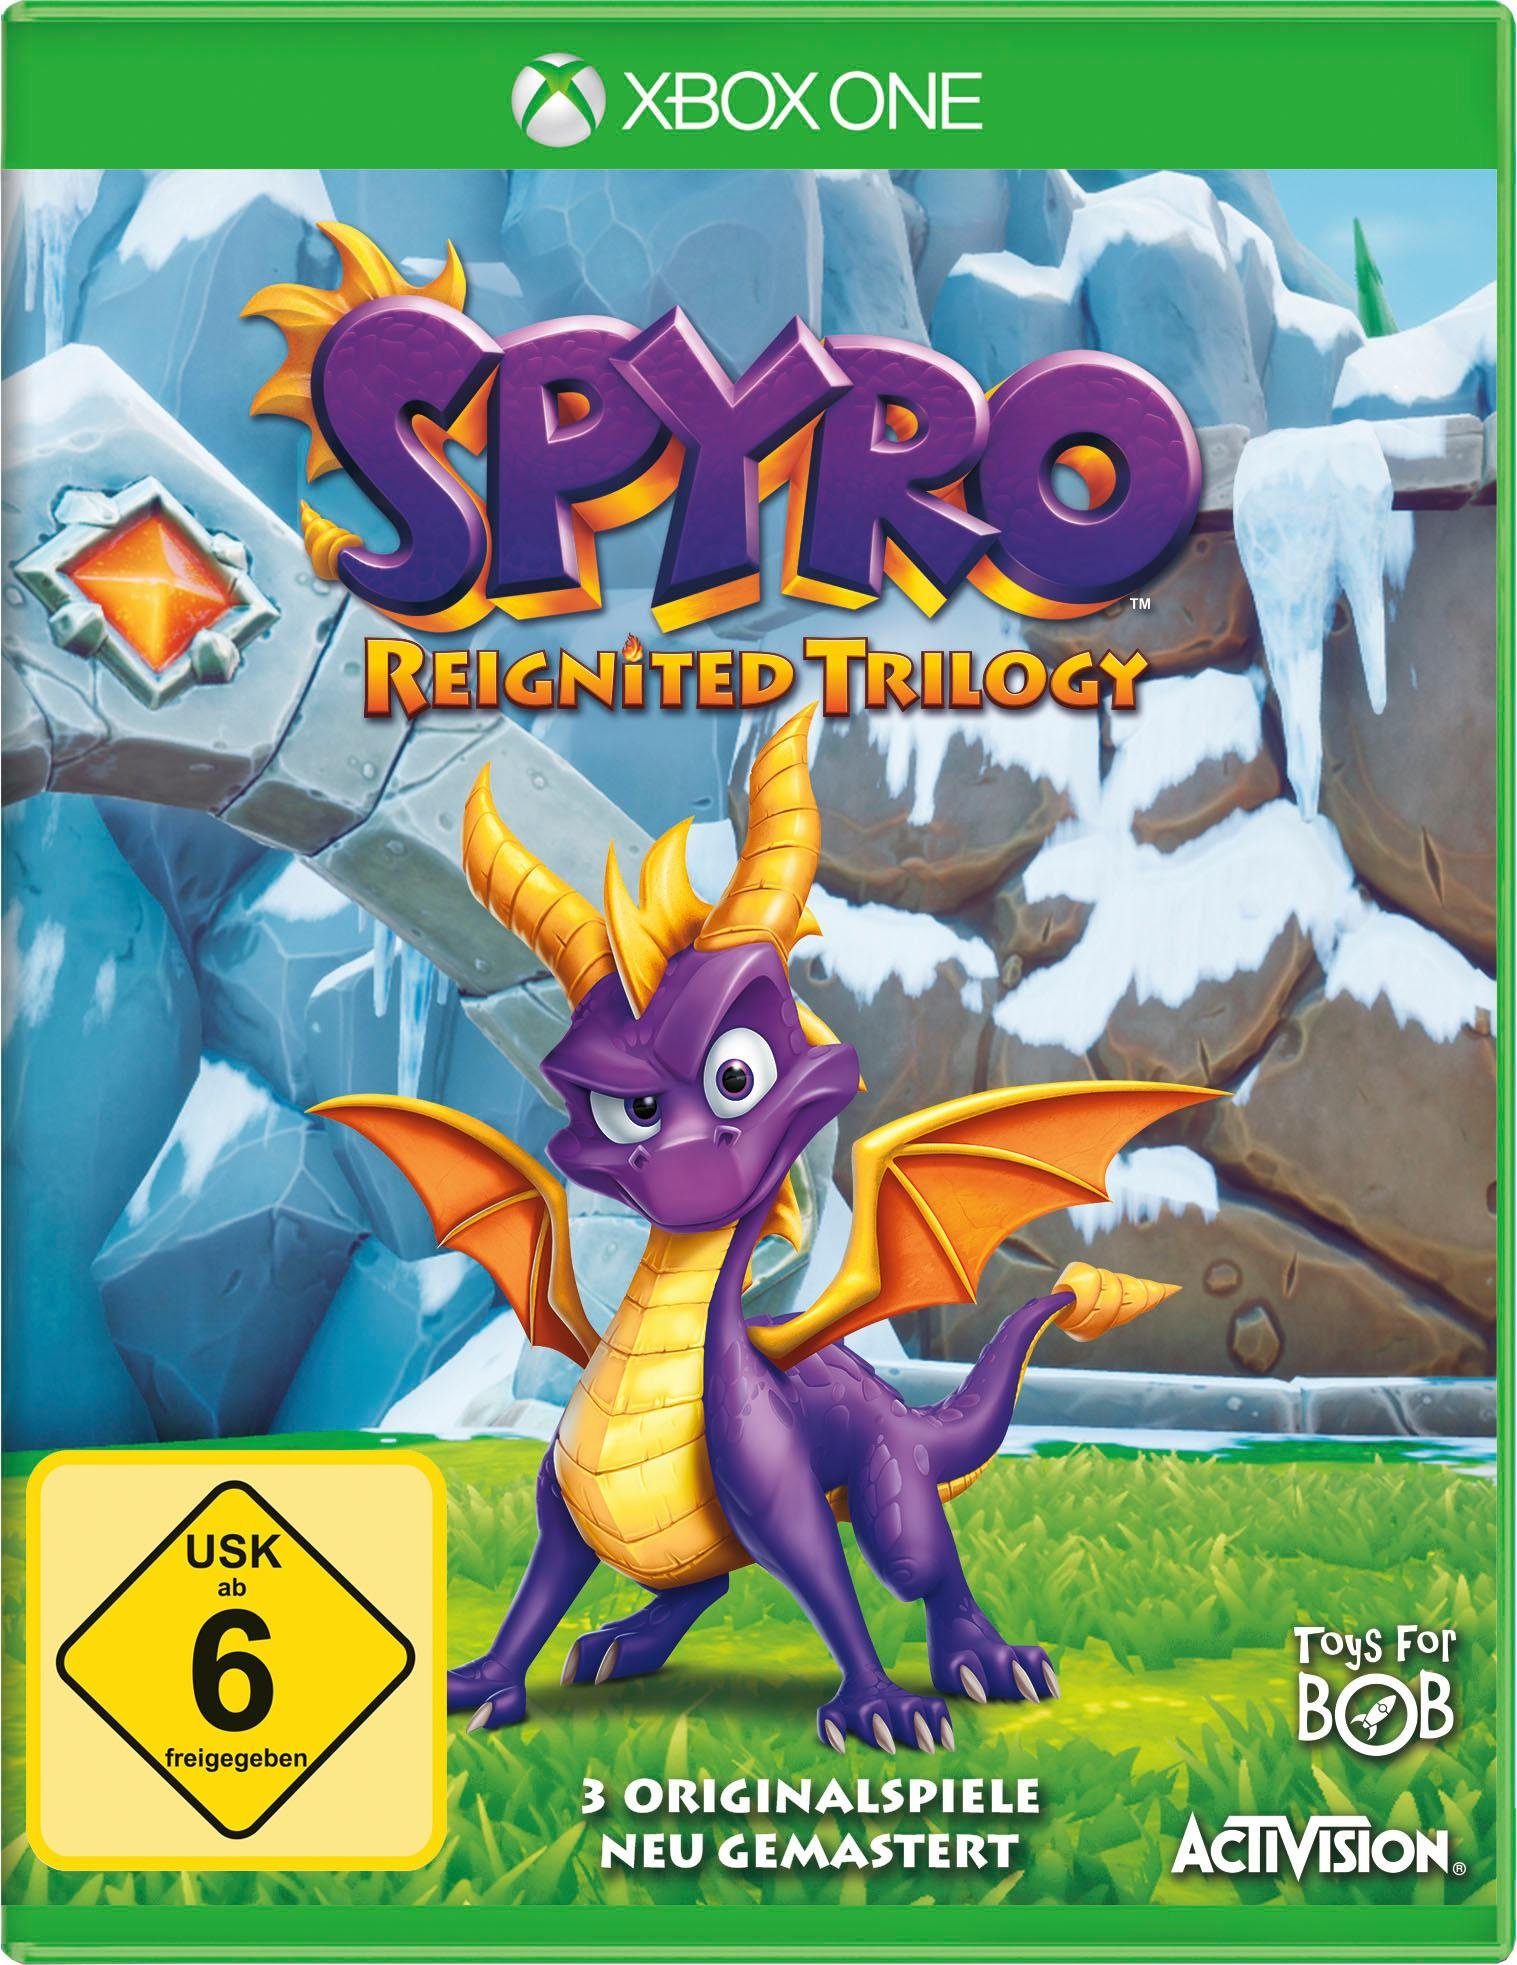 One Spyro Xbox Trilogy Activision Reignited